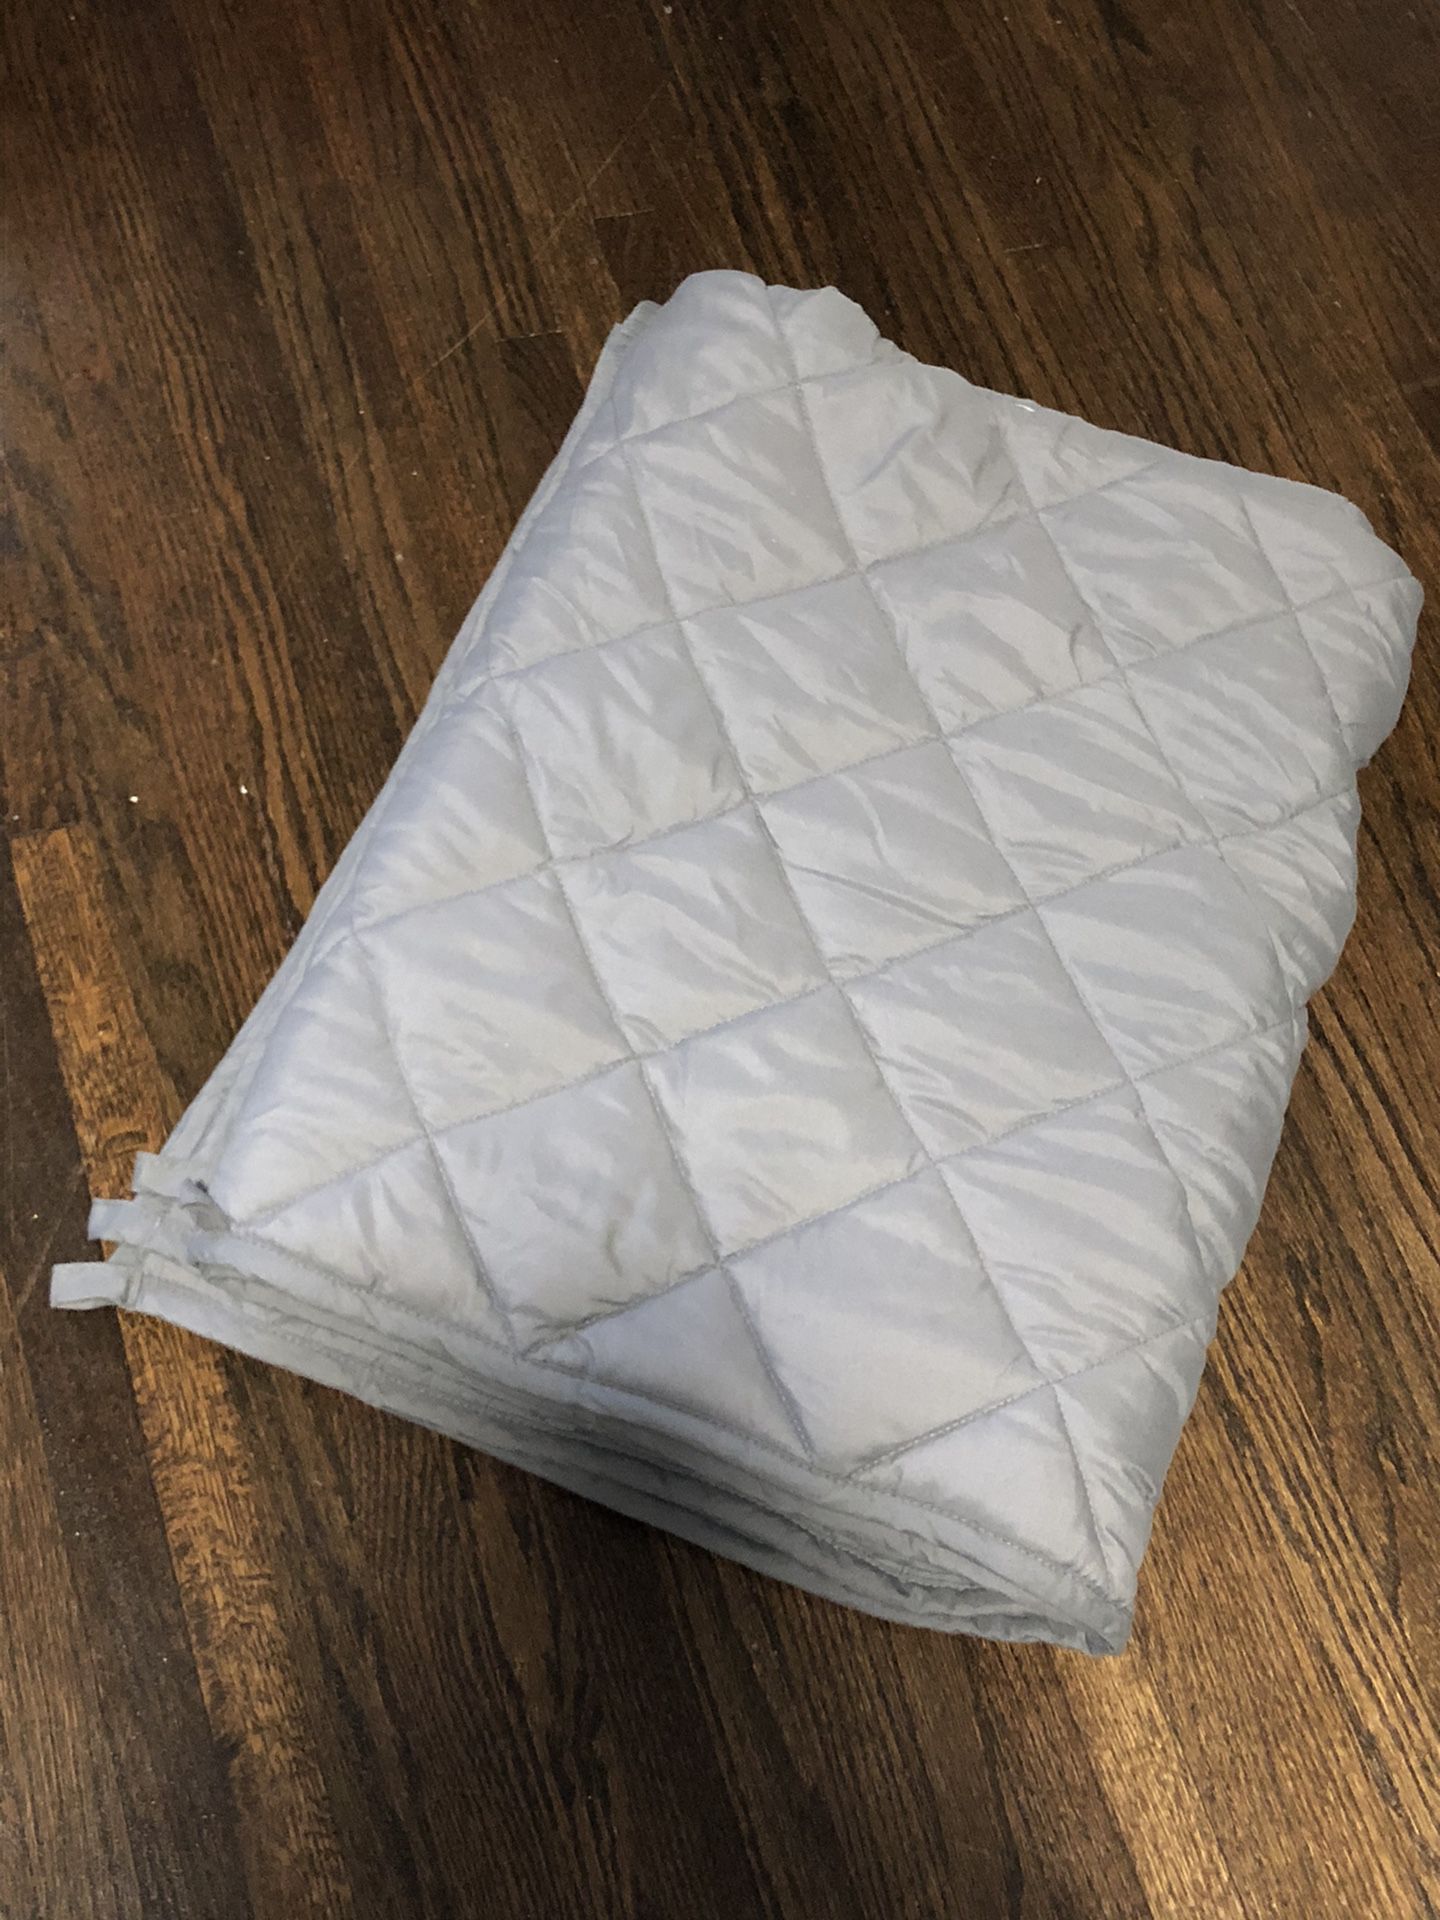 Weighted blanket (15lbs)